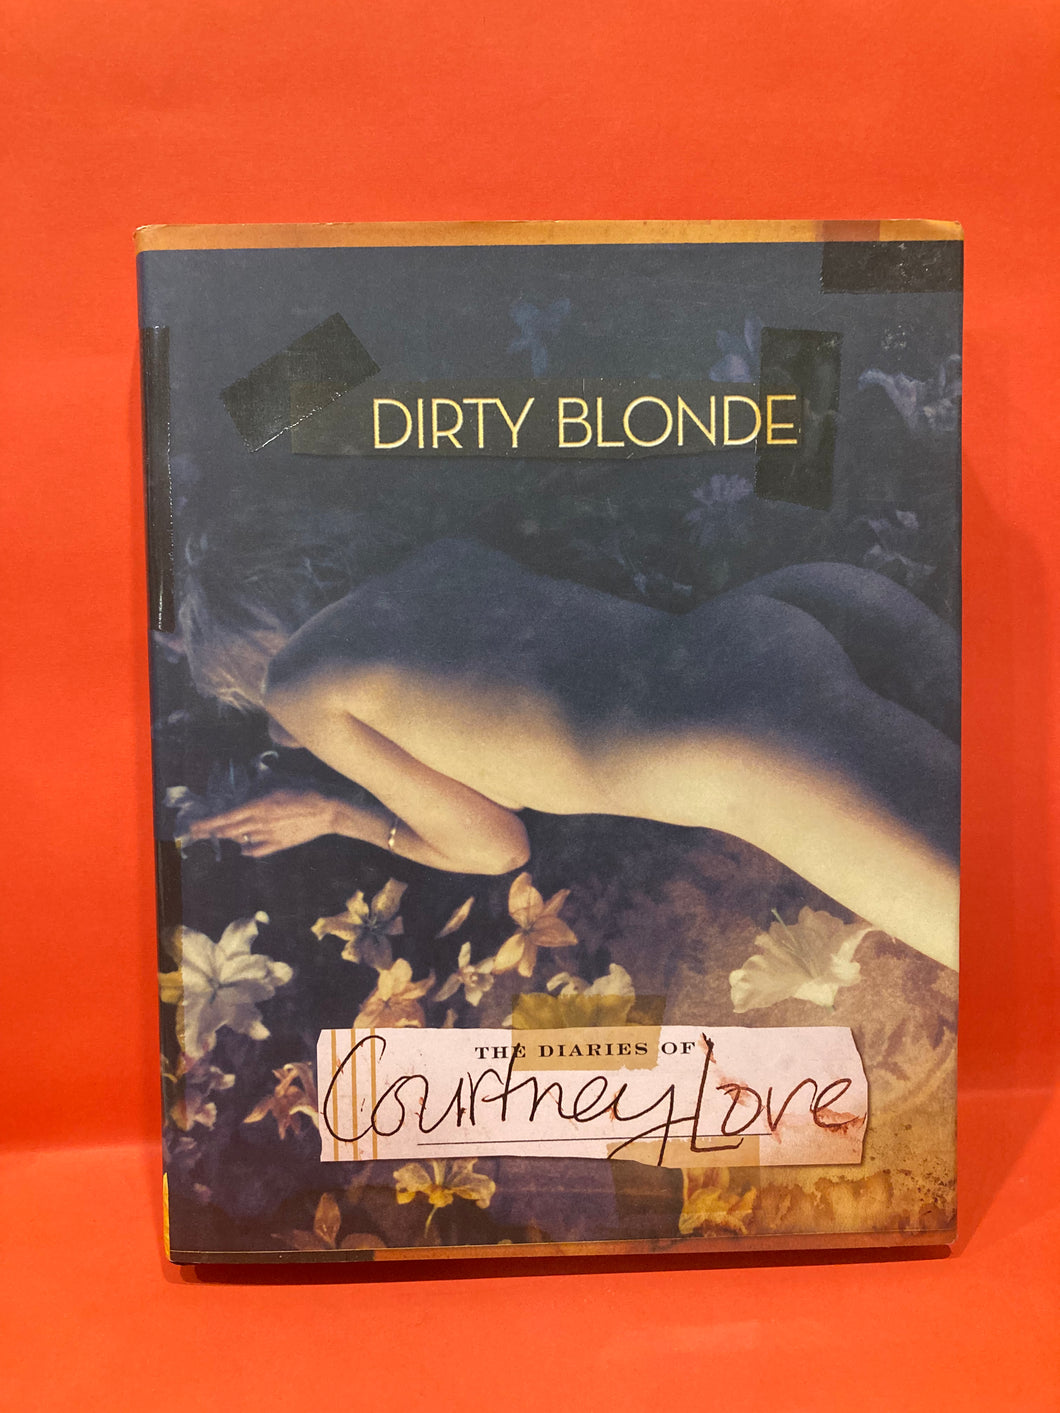 DIRTY BLONDE - THE DIARIES OF COURTNEY LOVE - HARDCOVER BOOK